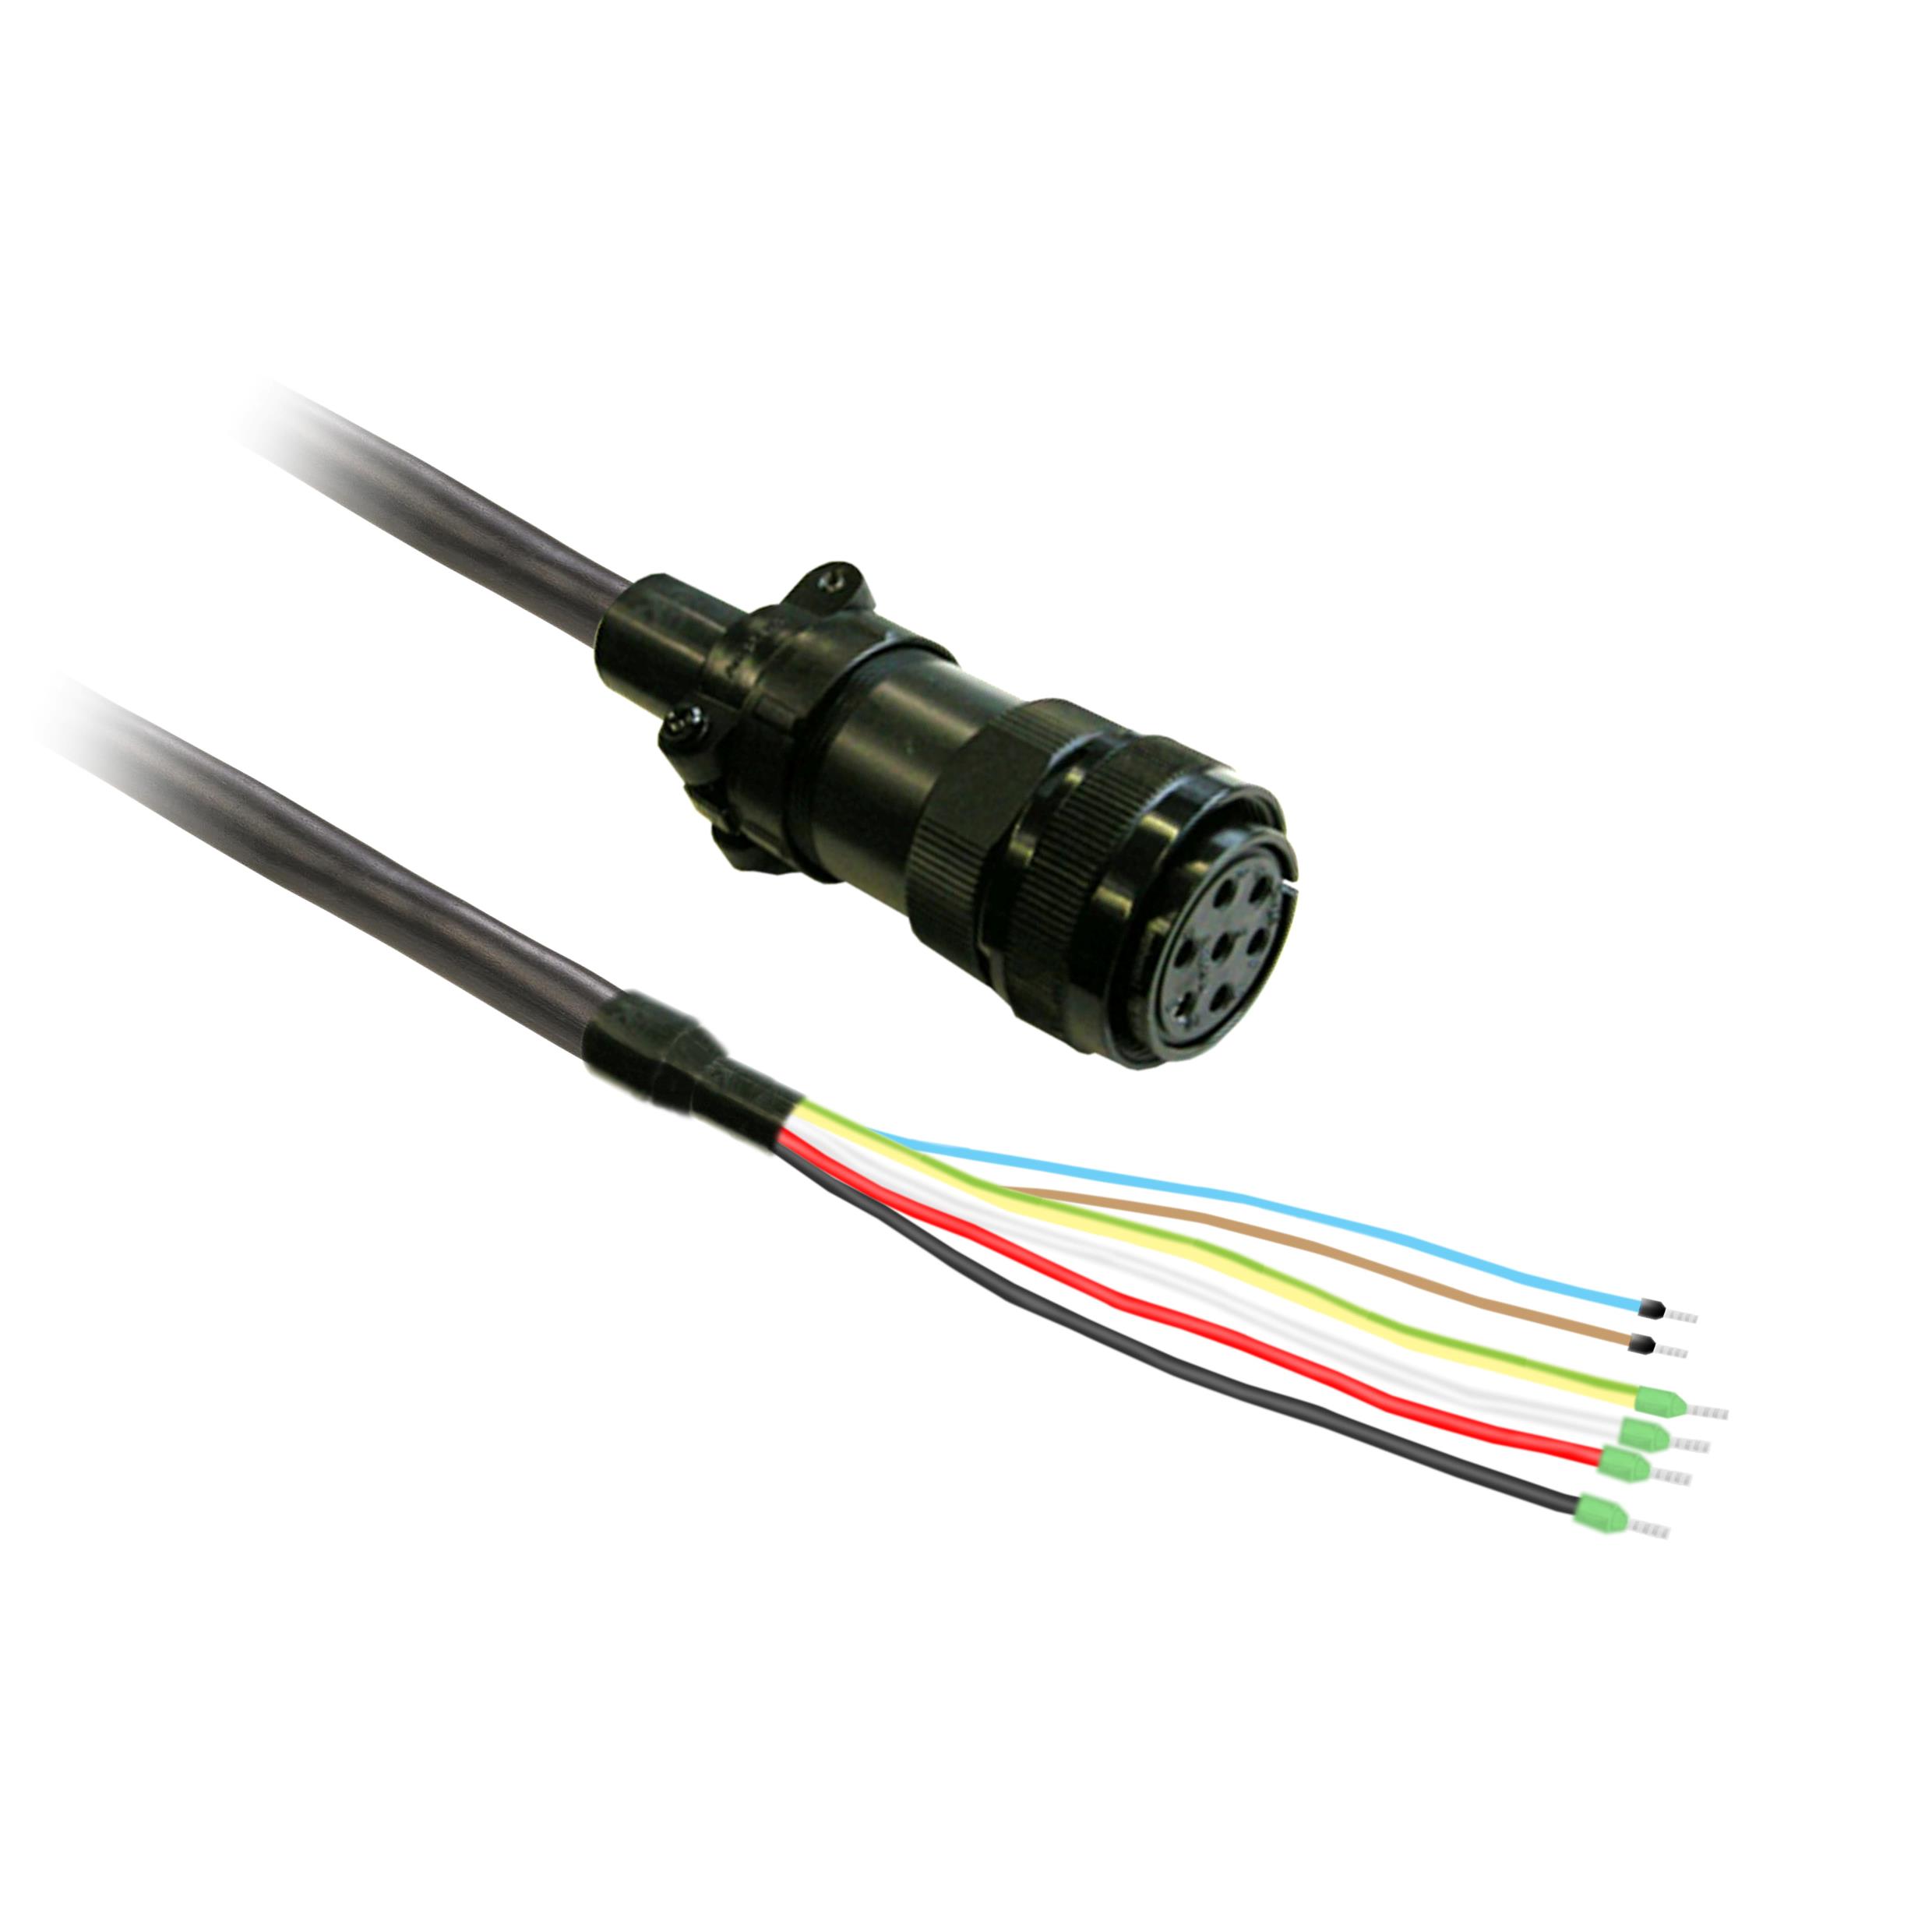 【VW3M5D6FR50】PWR CABLE 5M, 6MM , BCH2, BRK, M